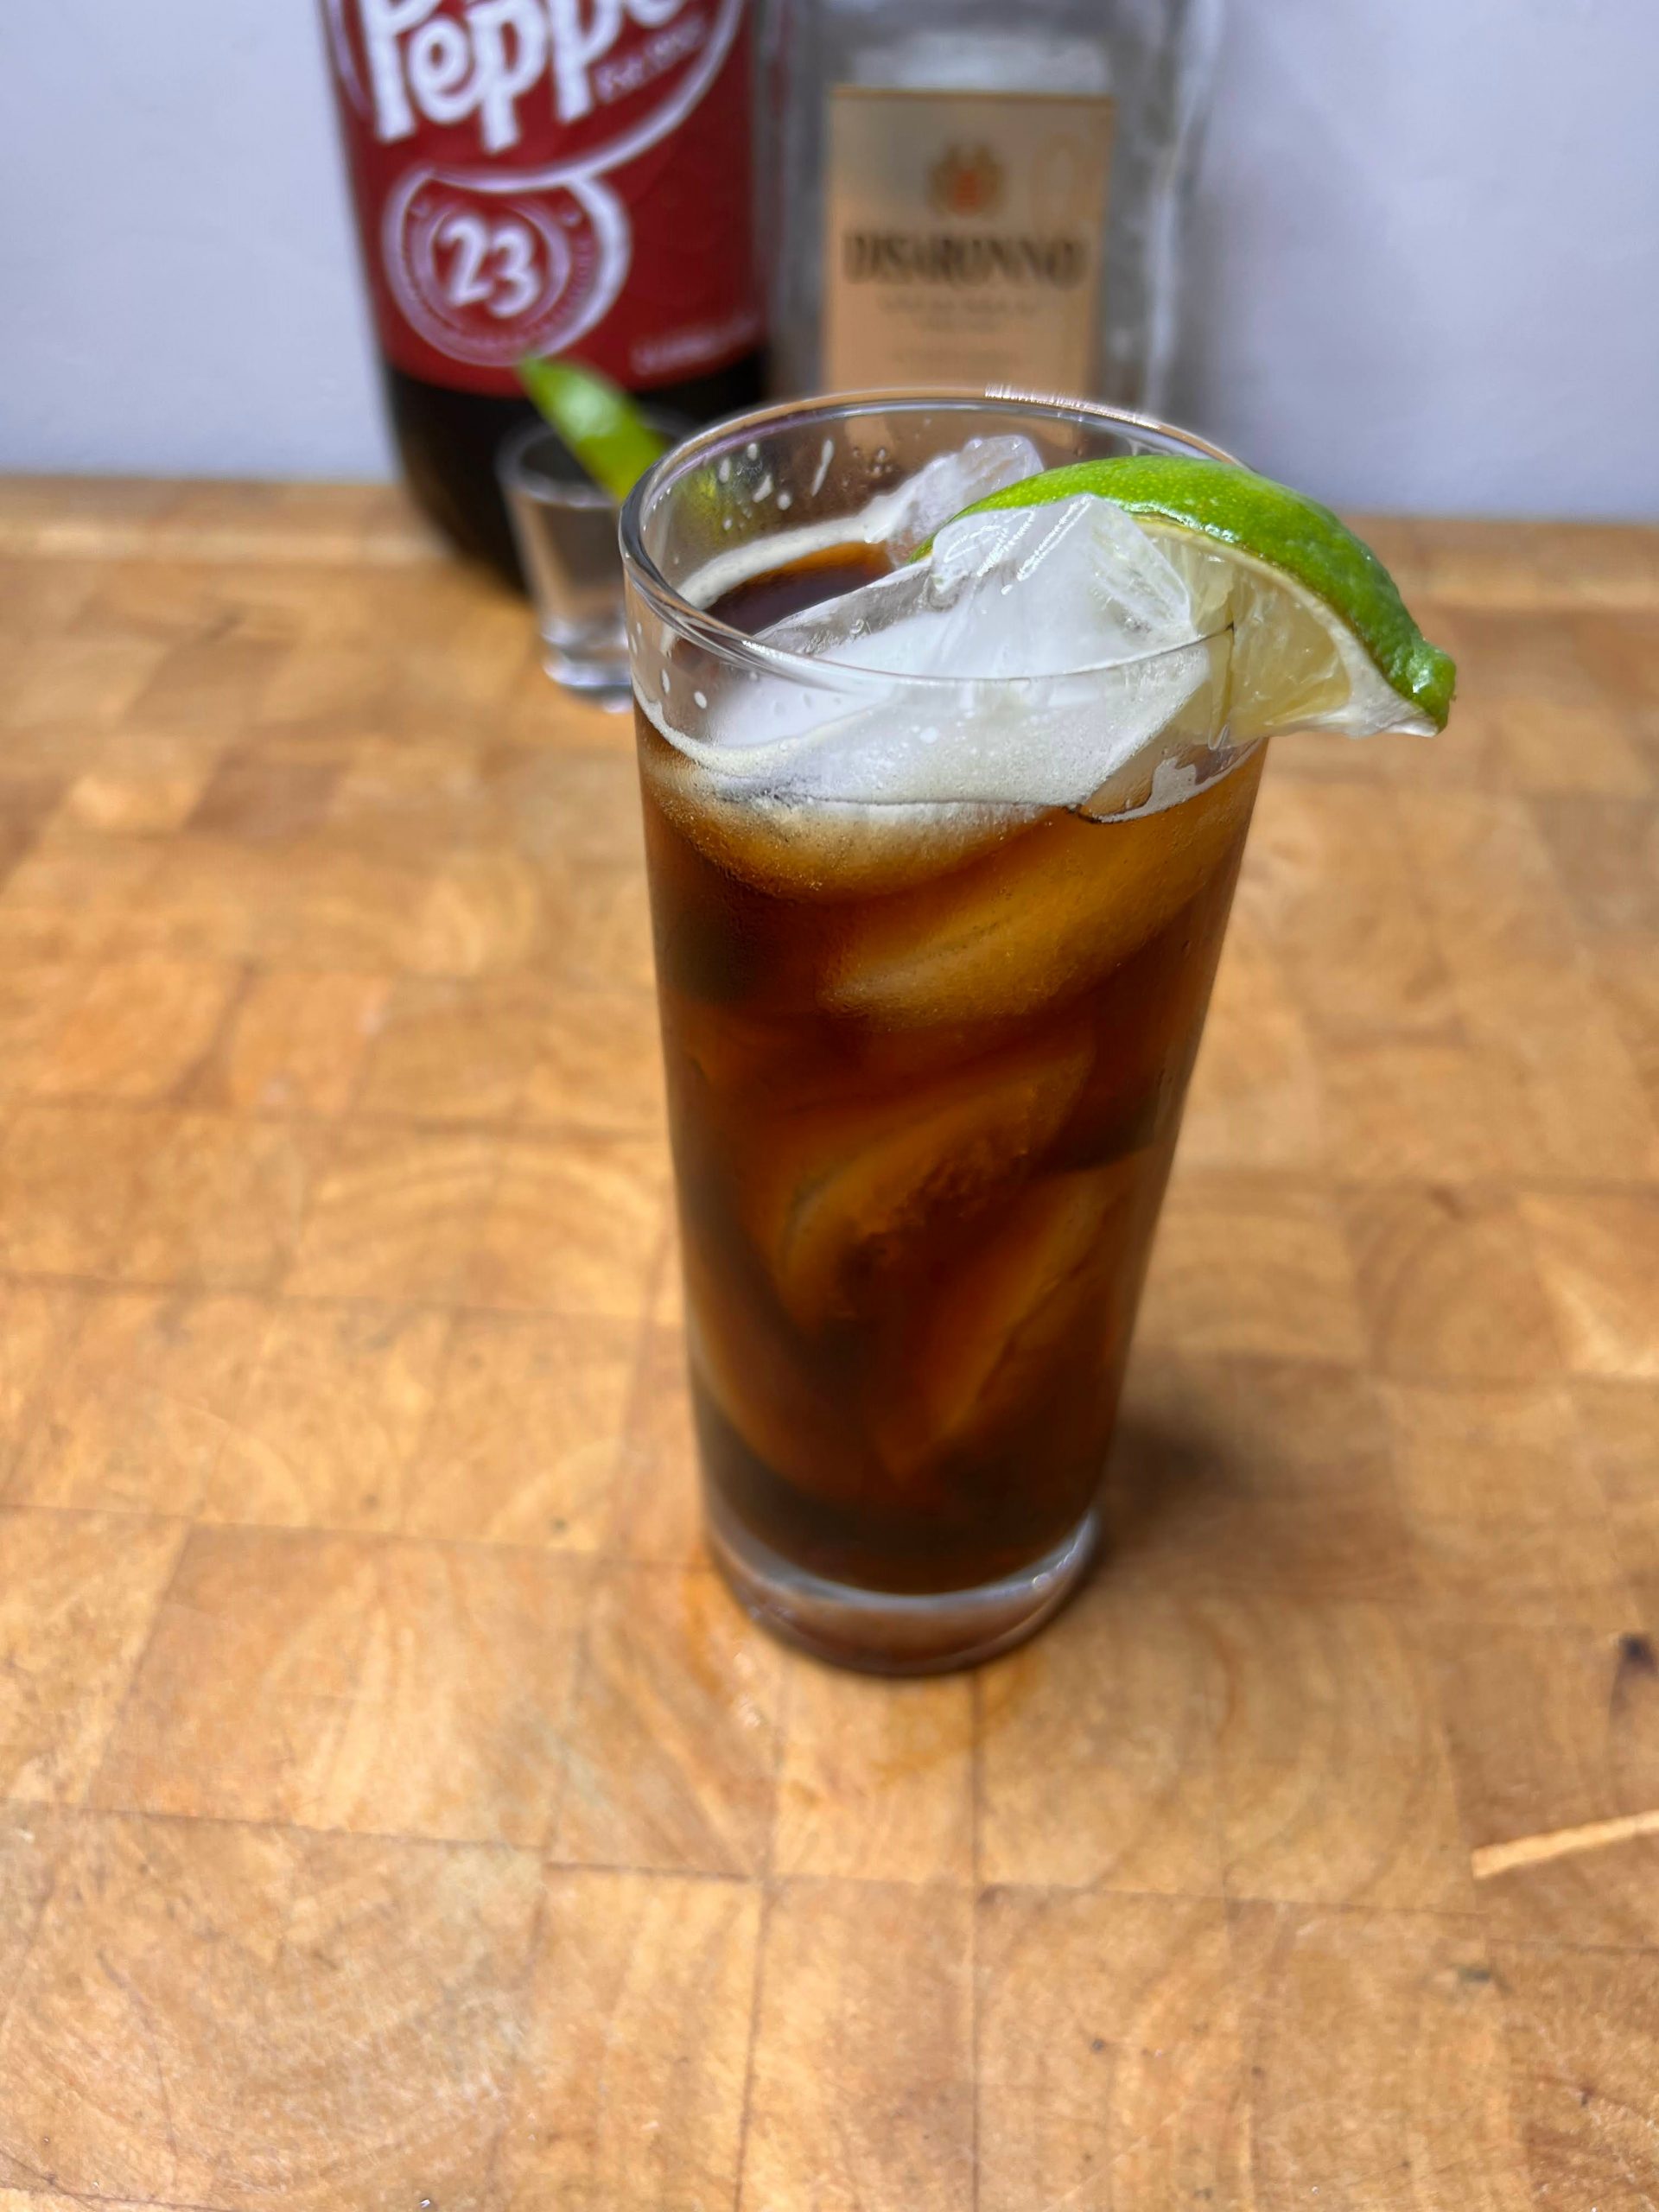 amaretto and dr pepper in a glass on a butcher block